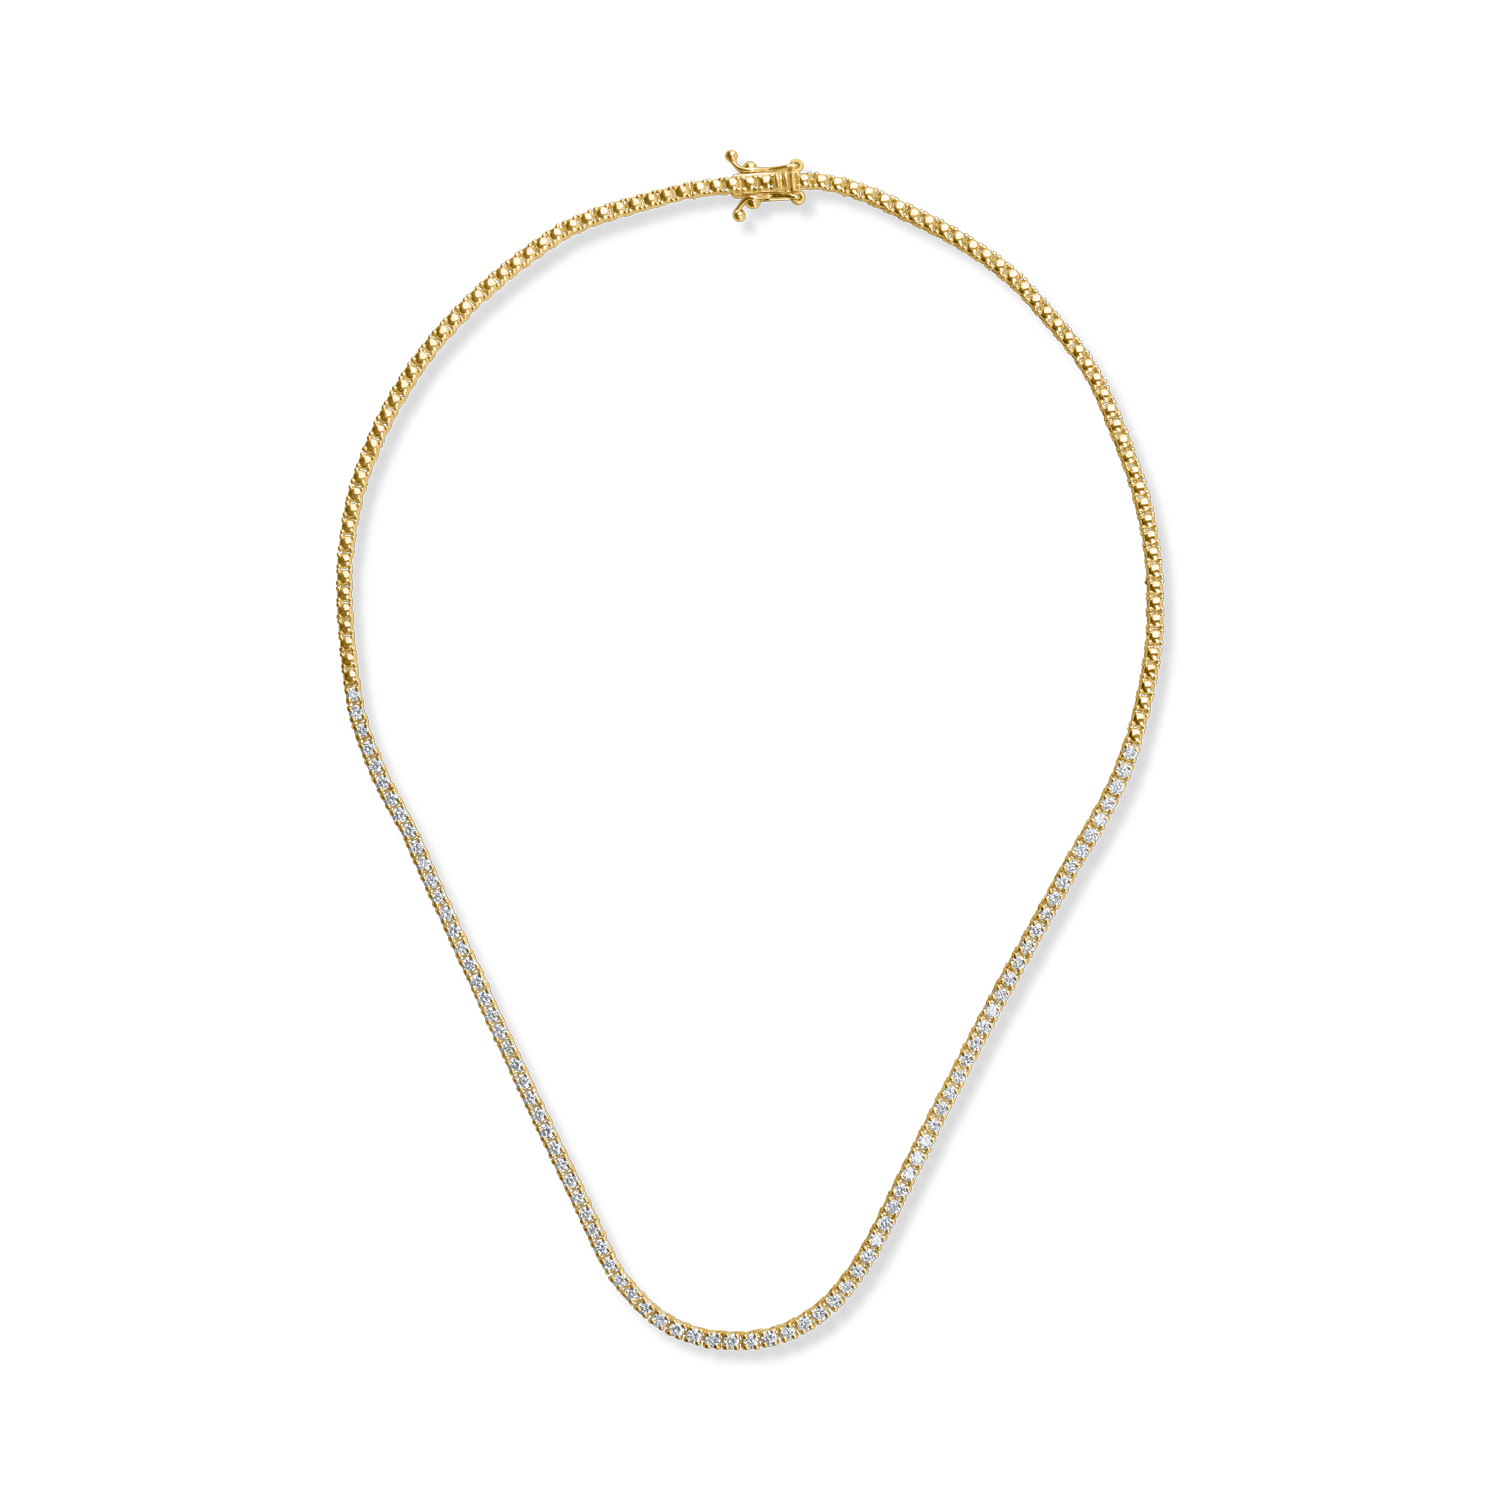 Yellow gold tennis necklace with 2.05ct diamonds